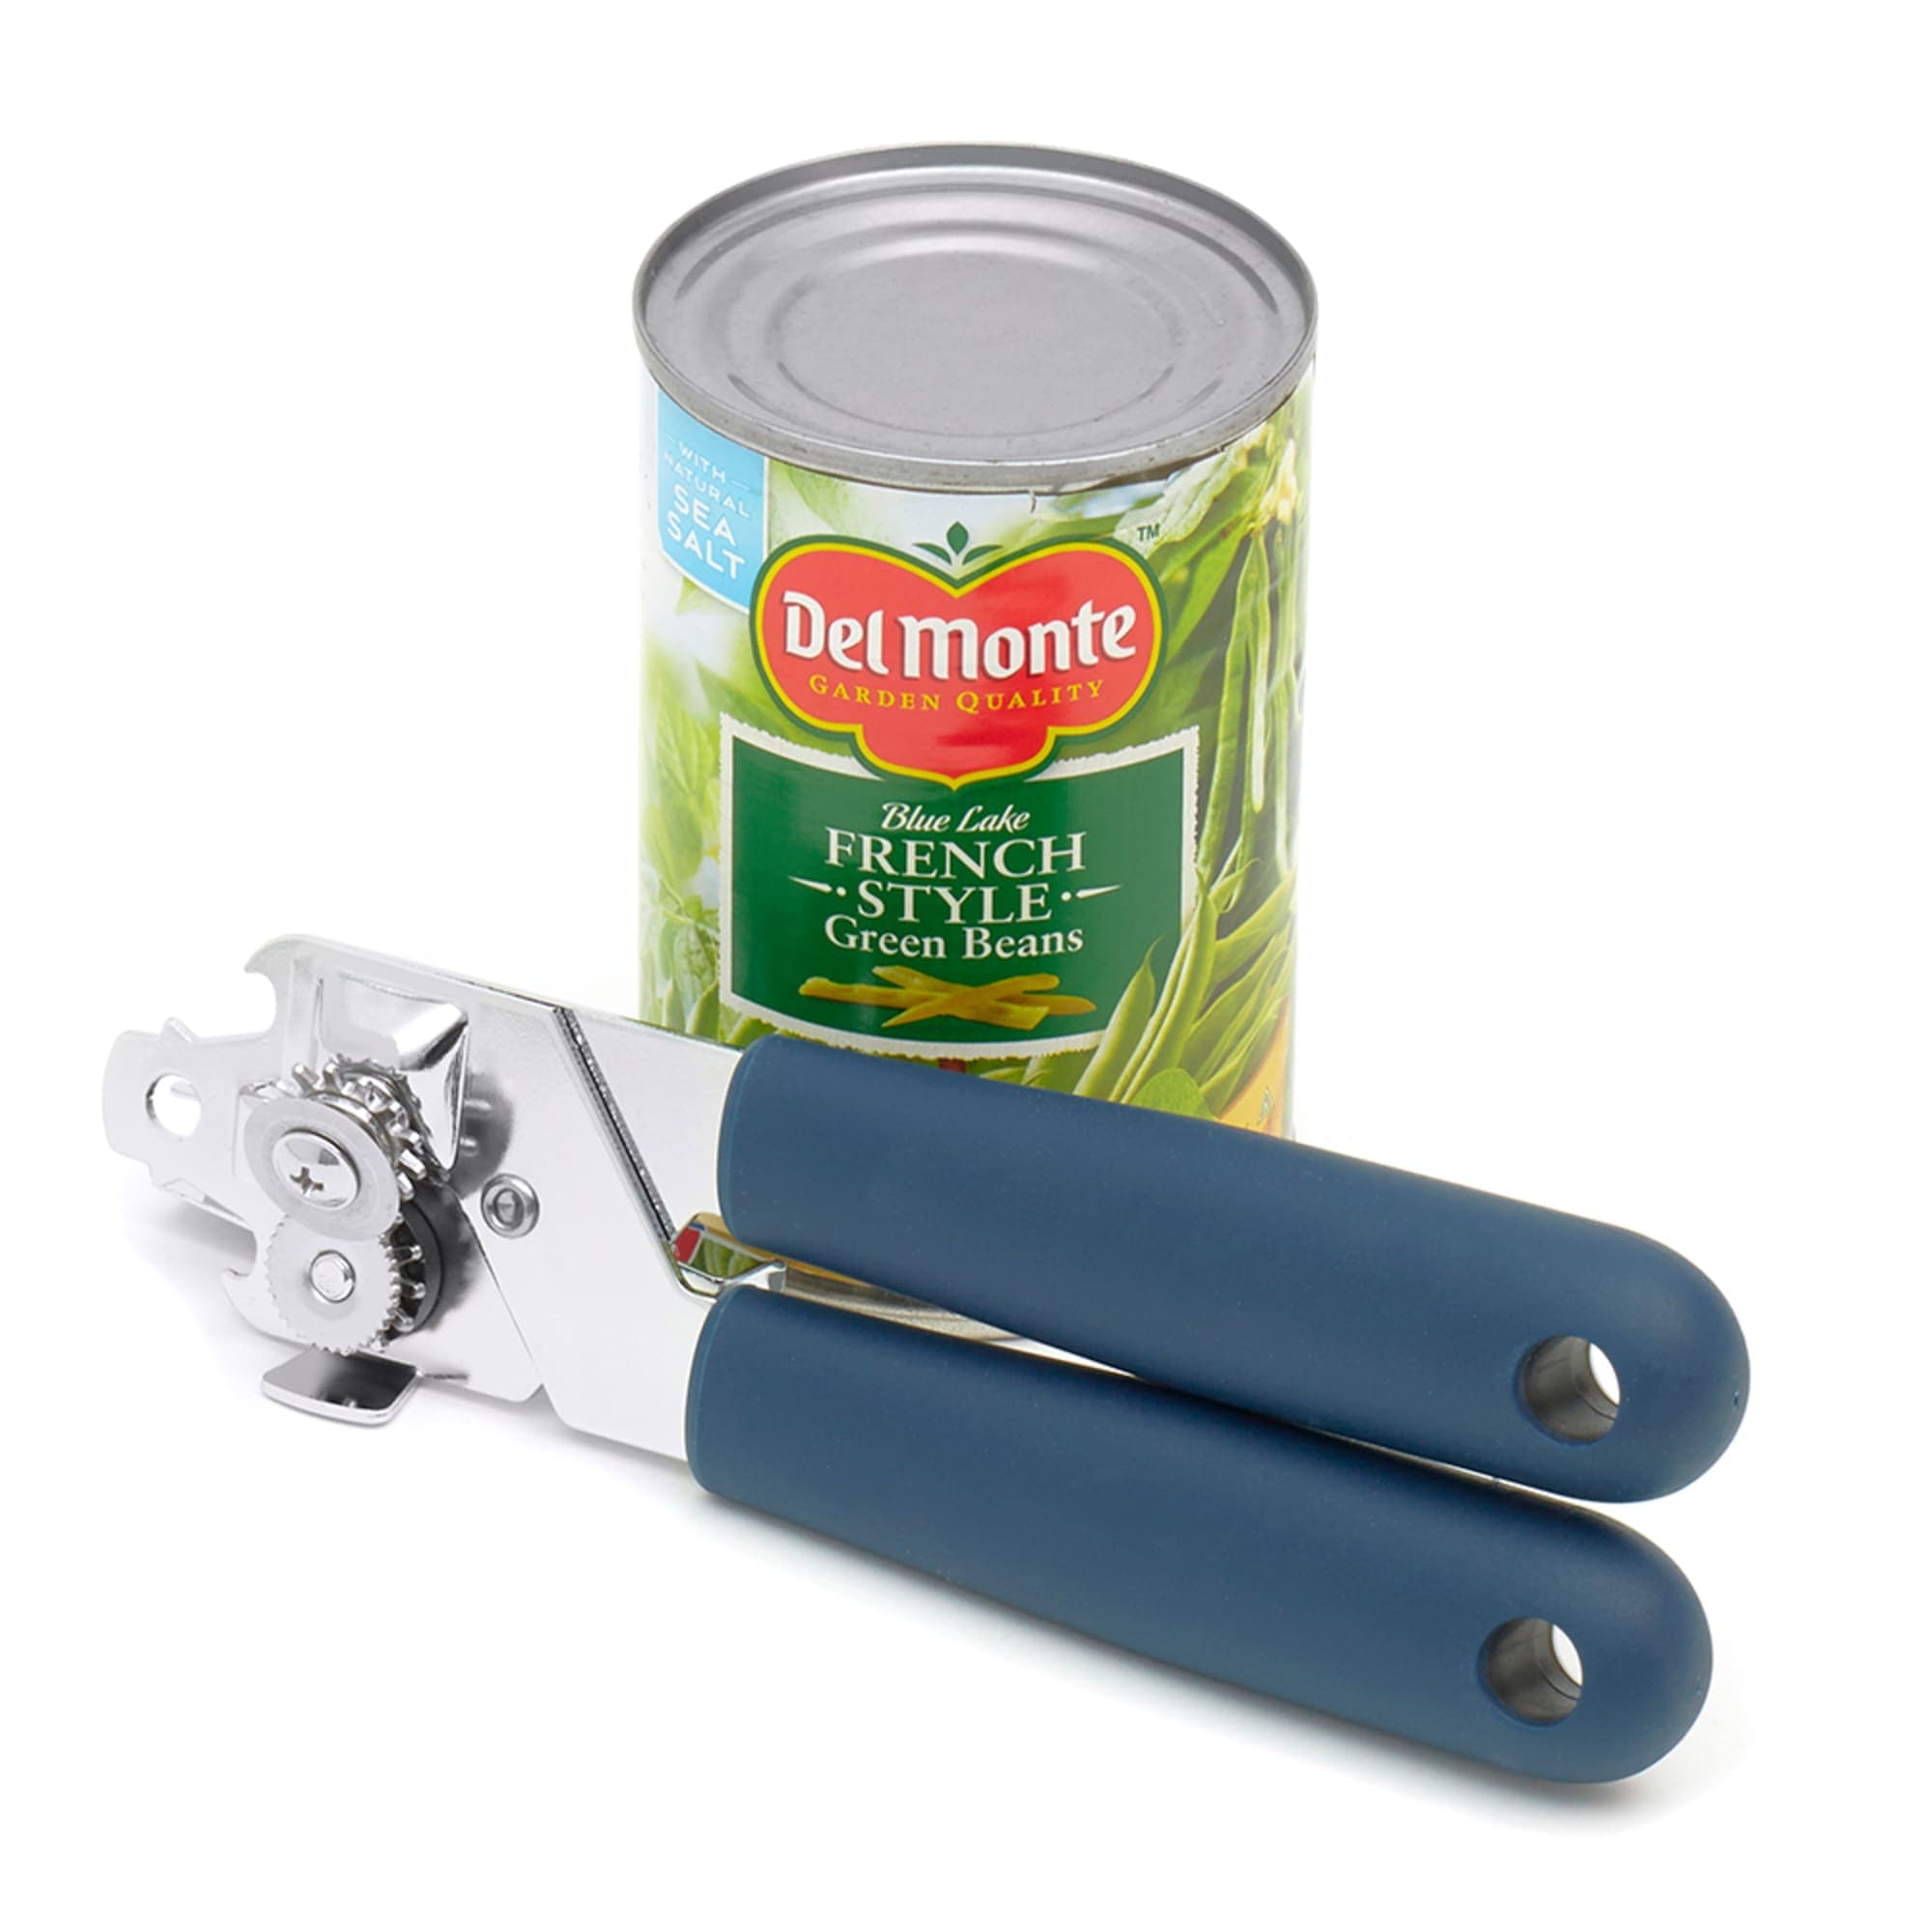 Michael Graves Design Comfortable Grip Stainless Steel Can Opener, Indigo $6.00 EACH, CASE PACK OF 24